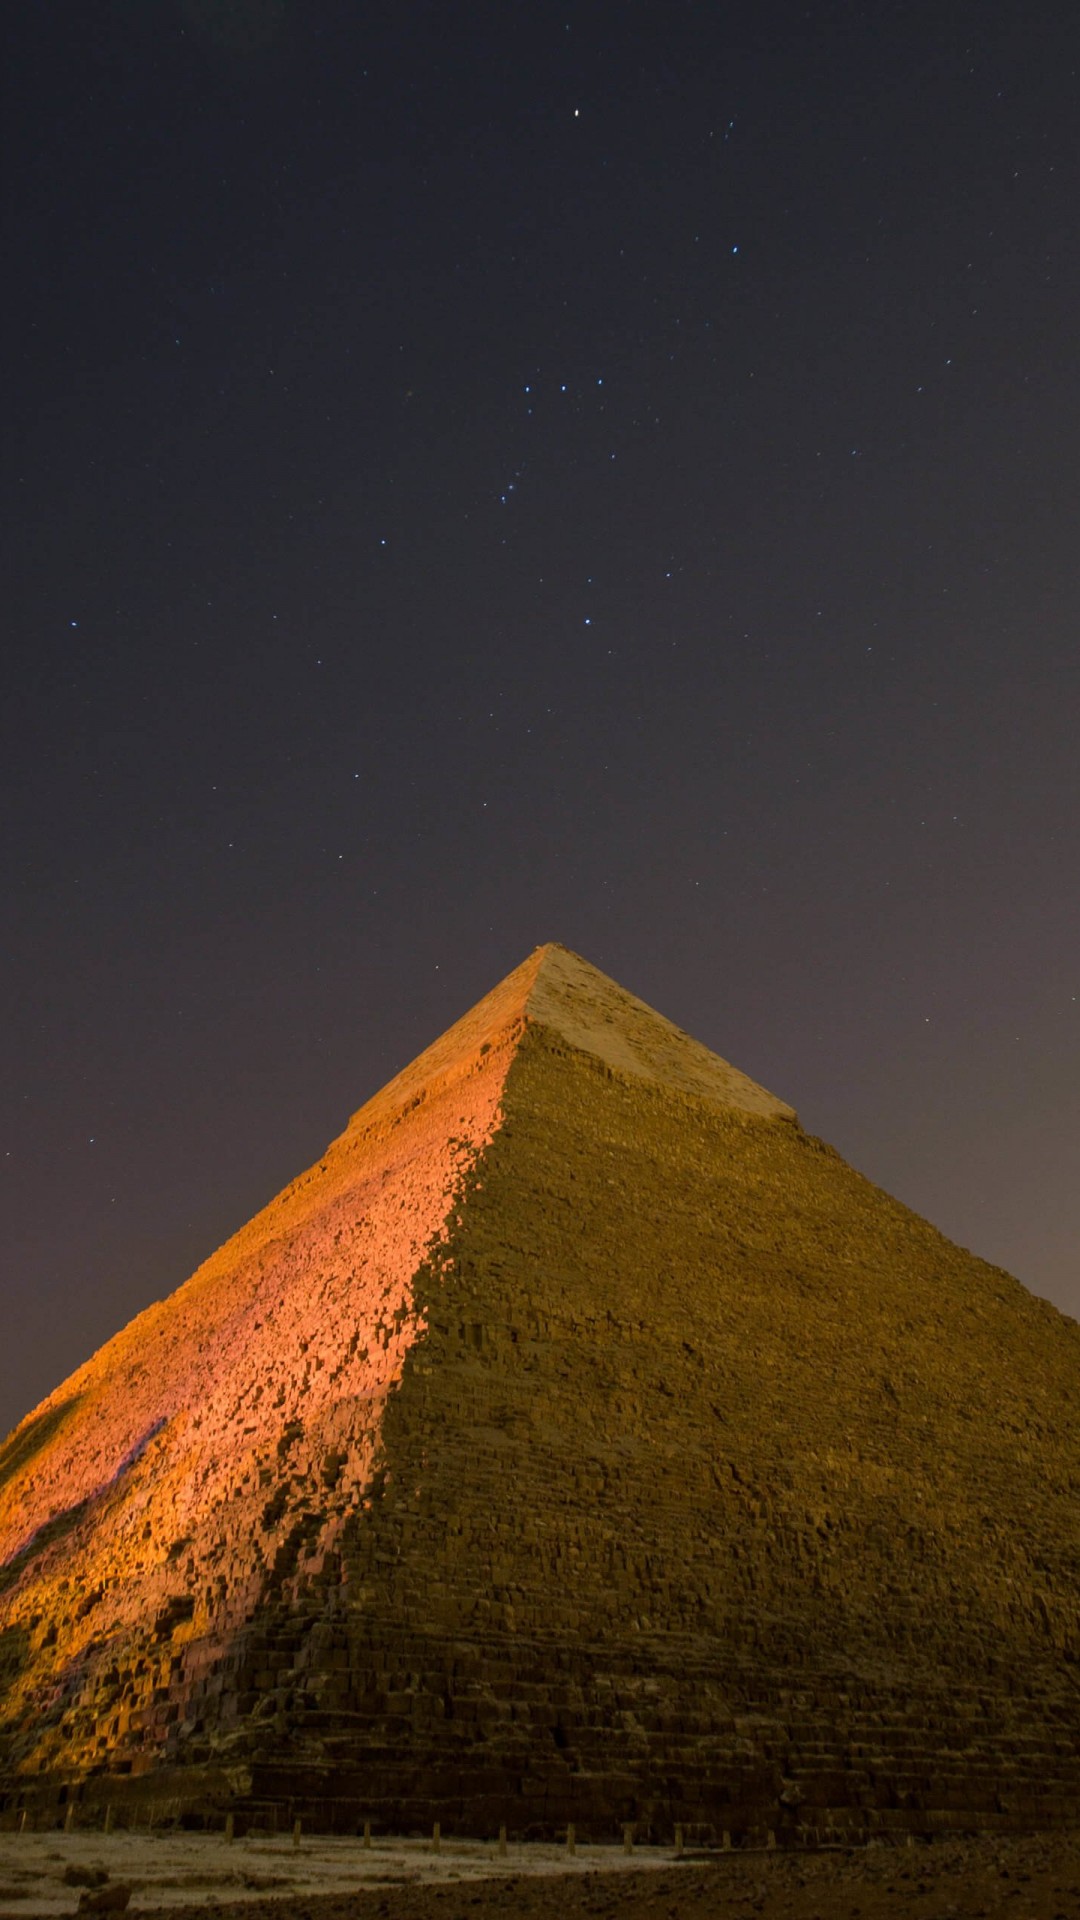 Pyramid by Night Wallpaper for SAMSUNG Galaxy S4